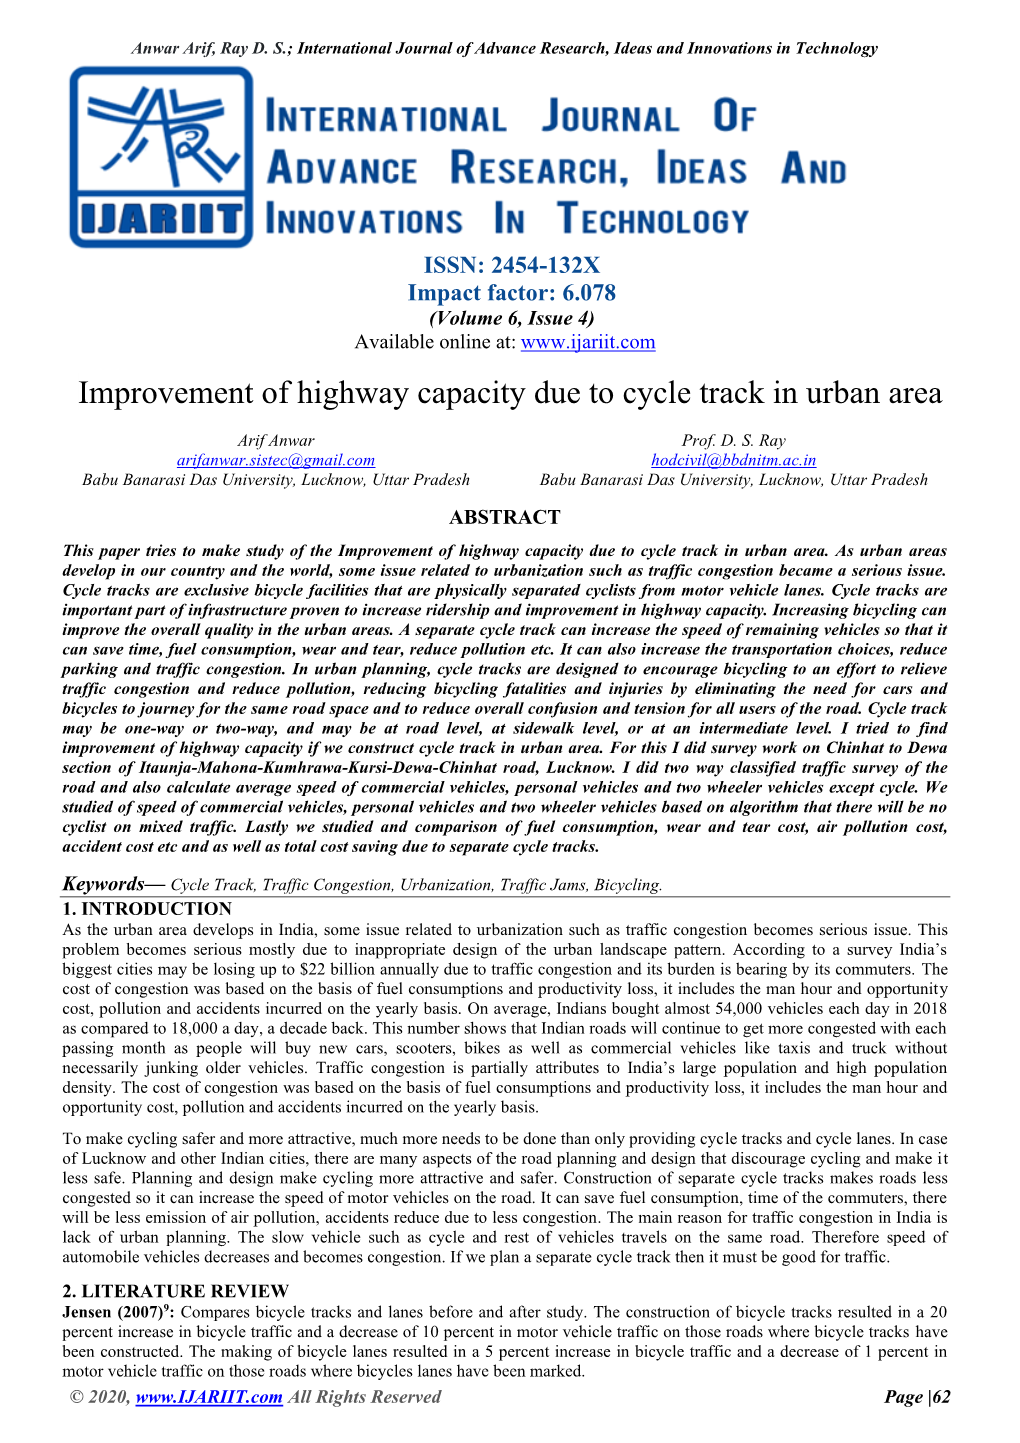 VIEW Jensen (2007)9: Compares Bicycle Tracks and Lanes Before and After Study